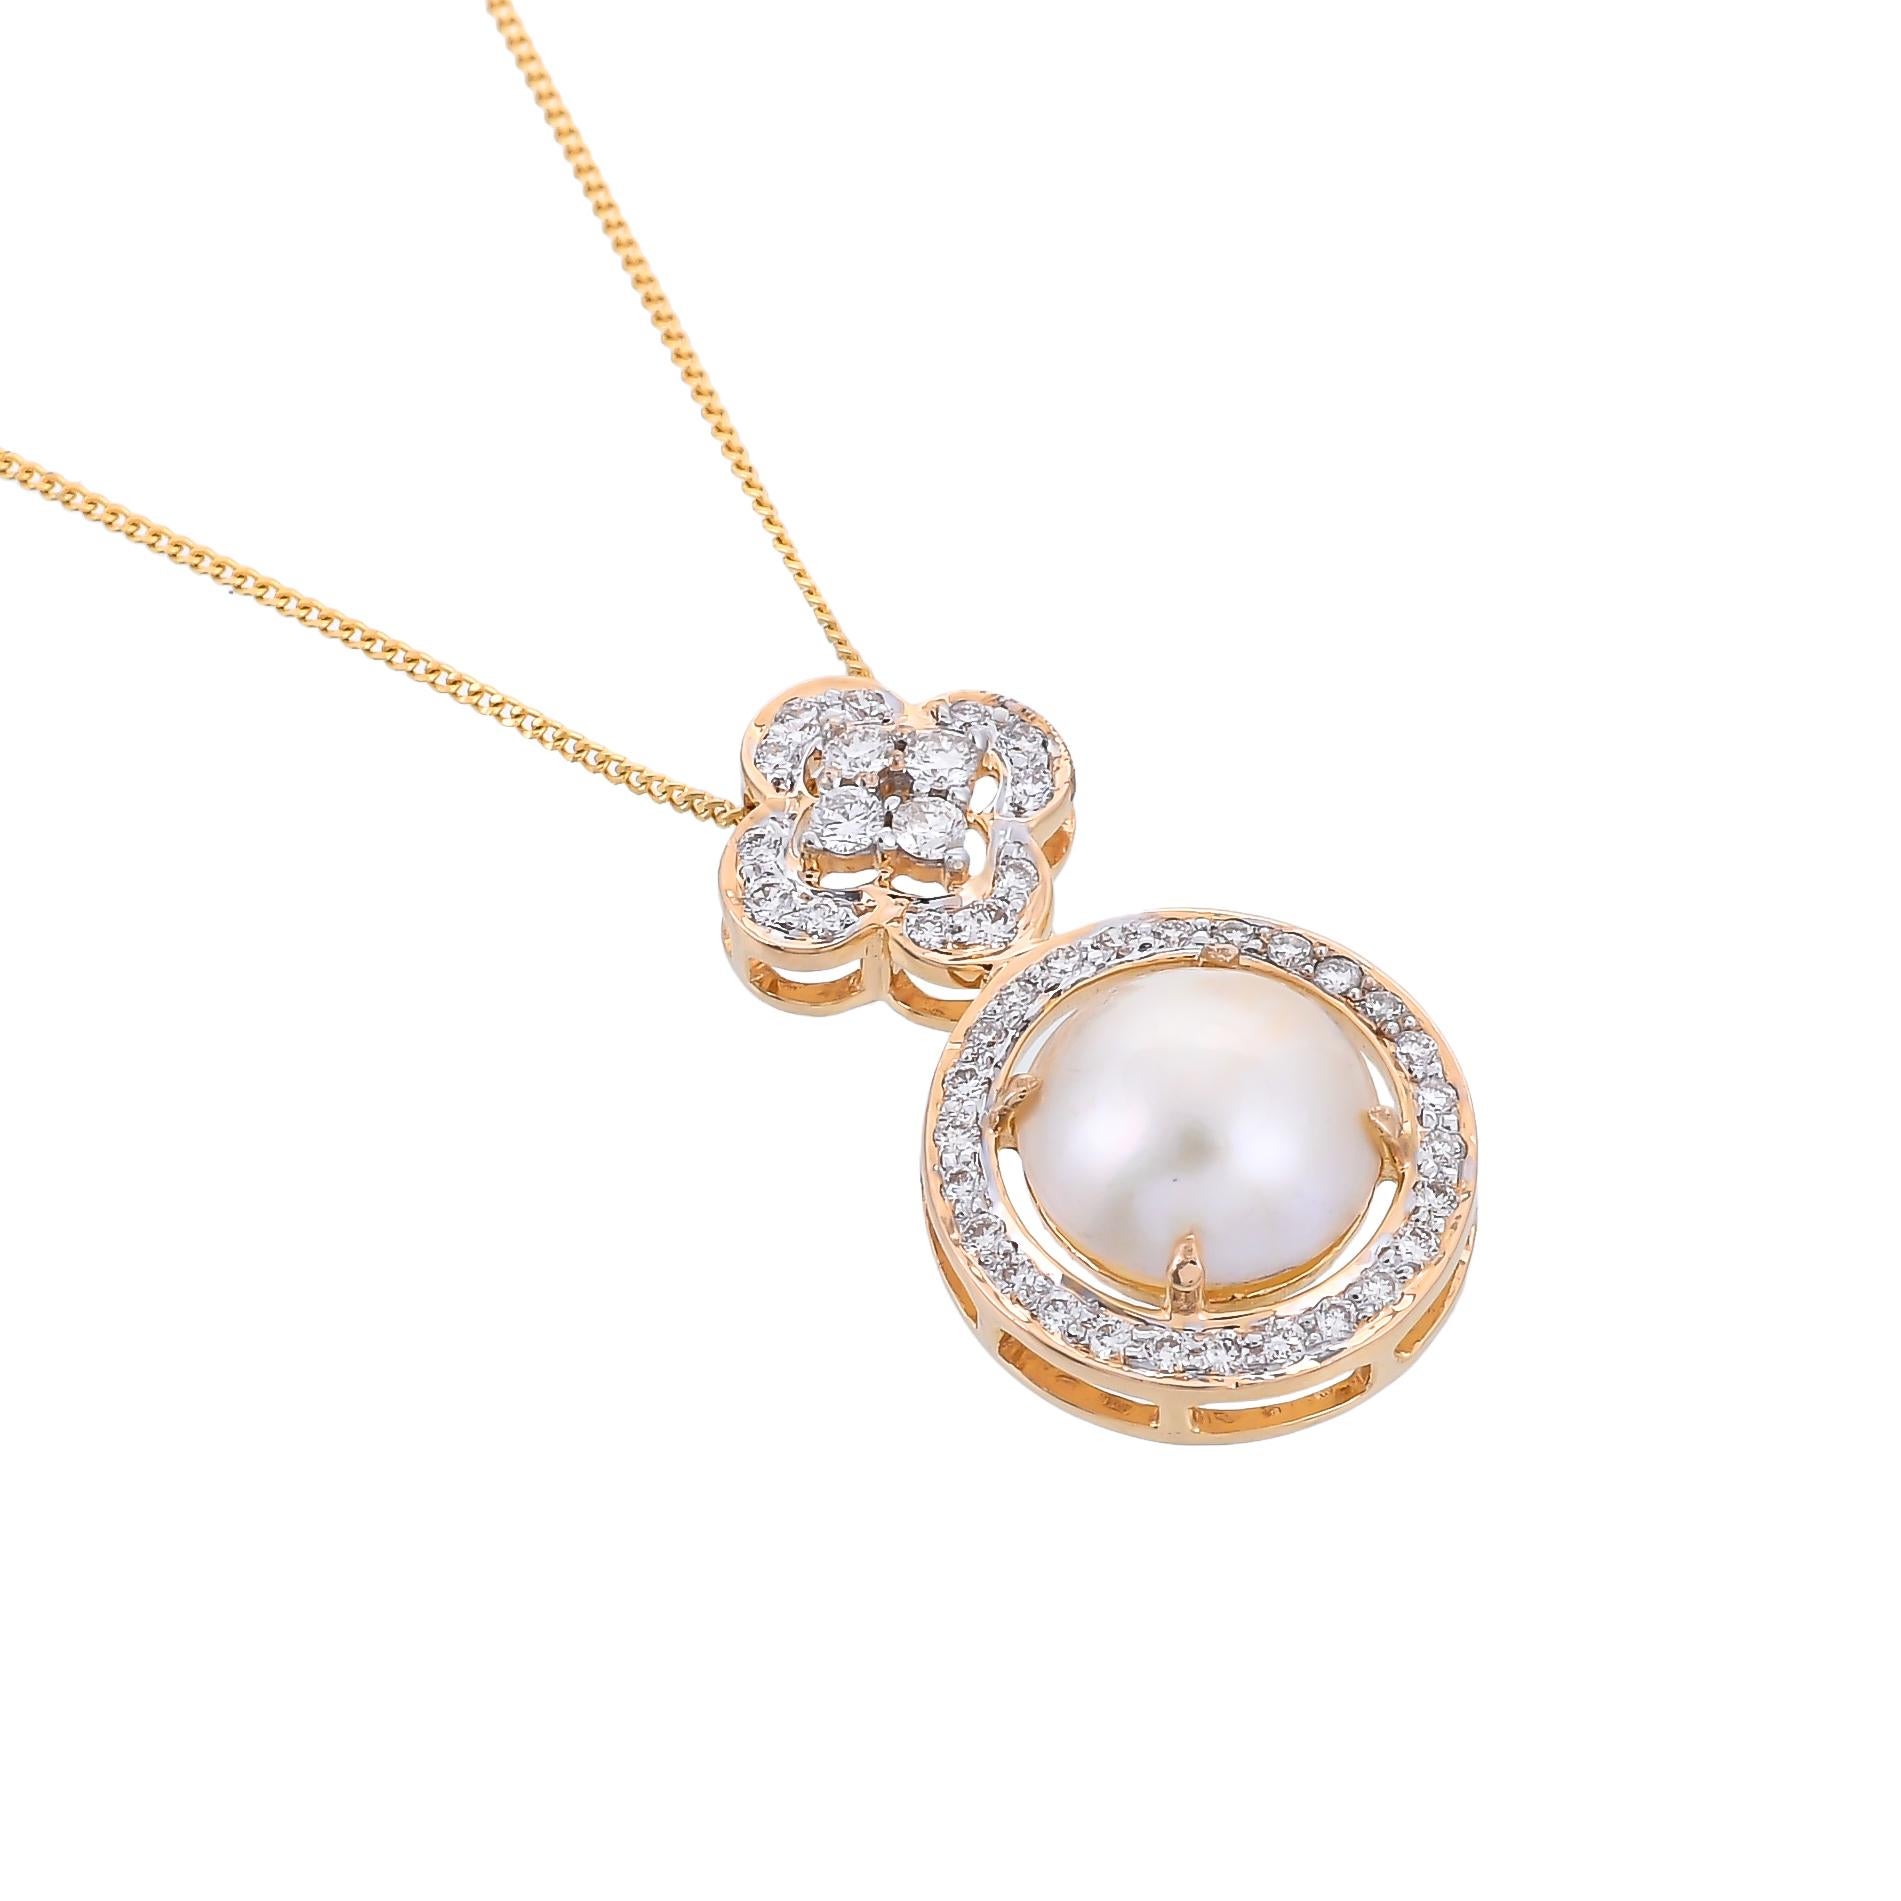 Crafted in 18 Karat yellow gold, this contemporary and chic pendant feature a 2.20-carat pearl embellished with 0.50 carats pave set diamonds.
Add extra sparkle with this precious and one of a kind piece.
Stone Size-10x10mm
The total length of the